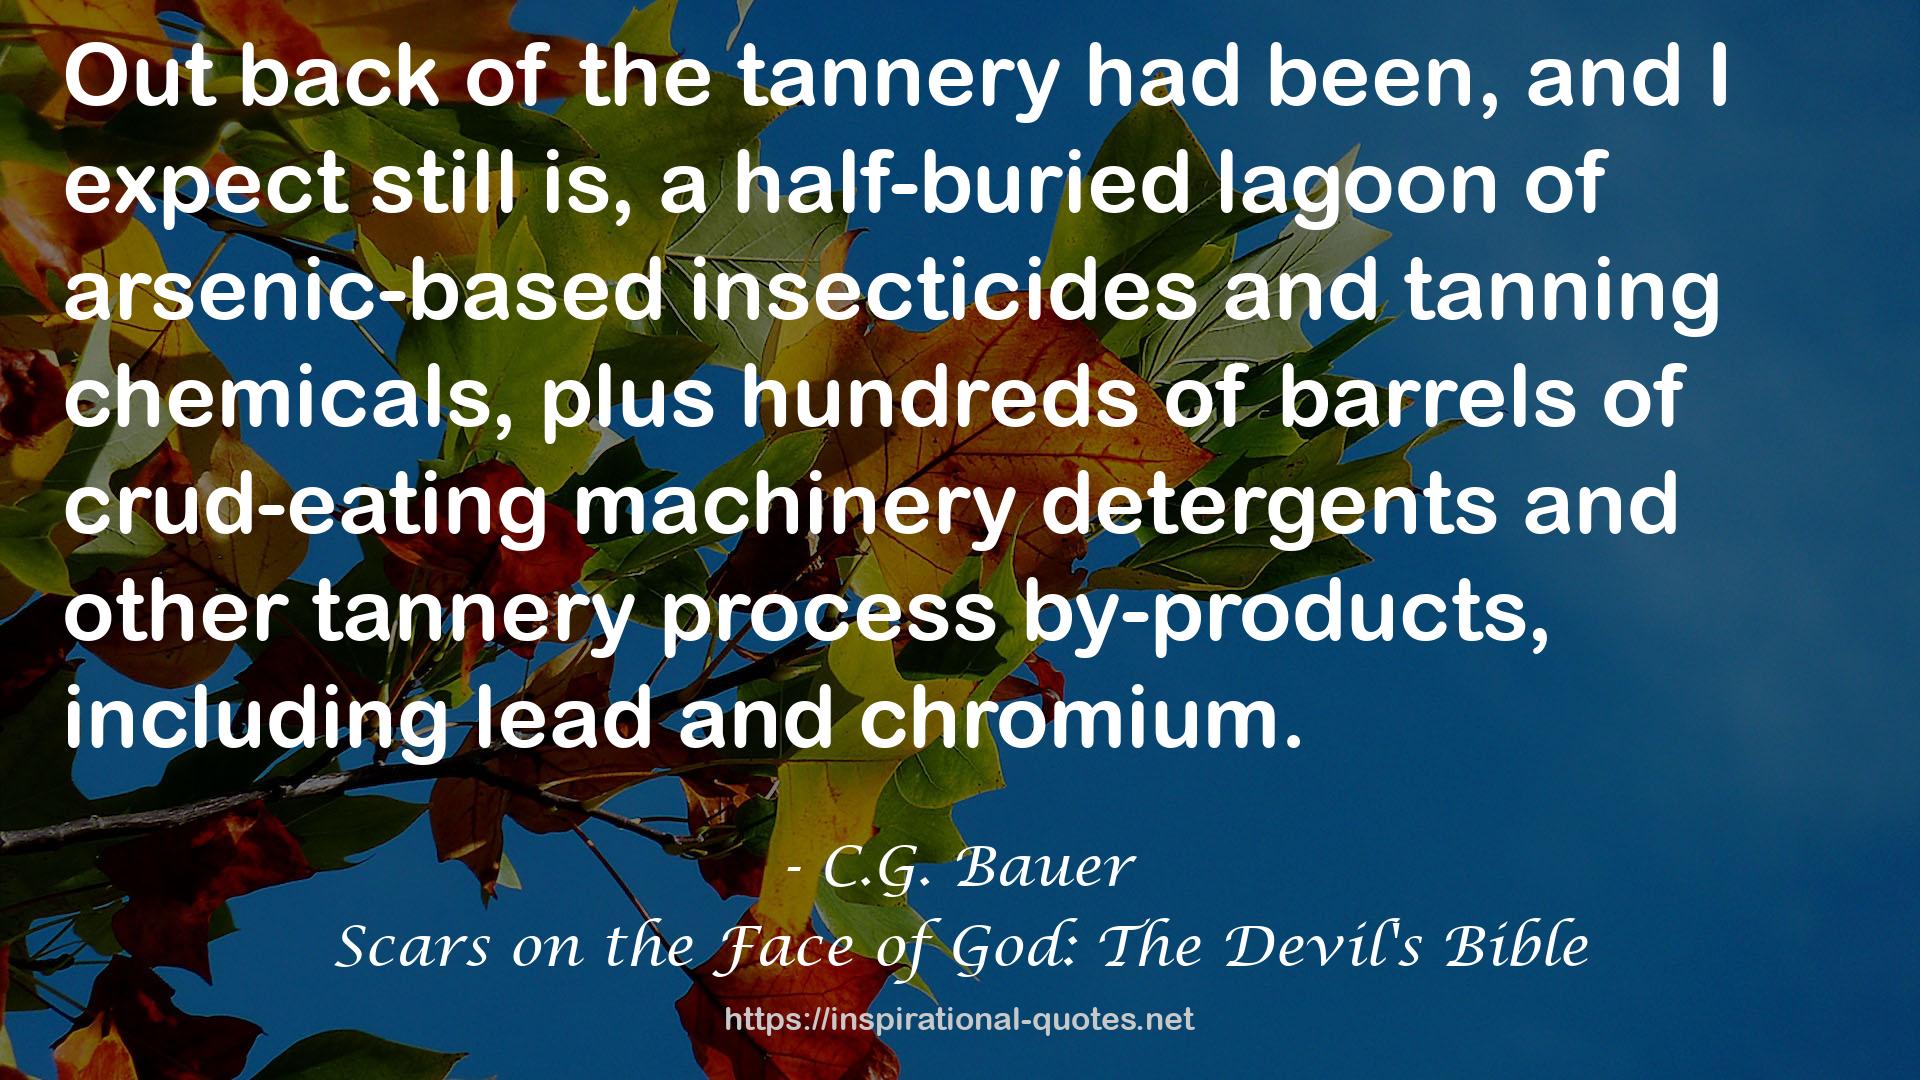 Scars on the Face of God: The Devil's Bible QUOTES